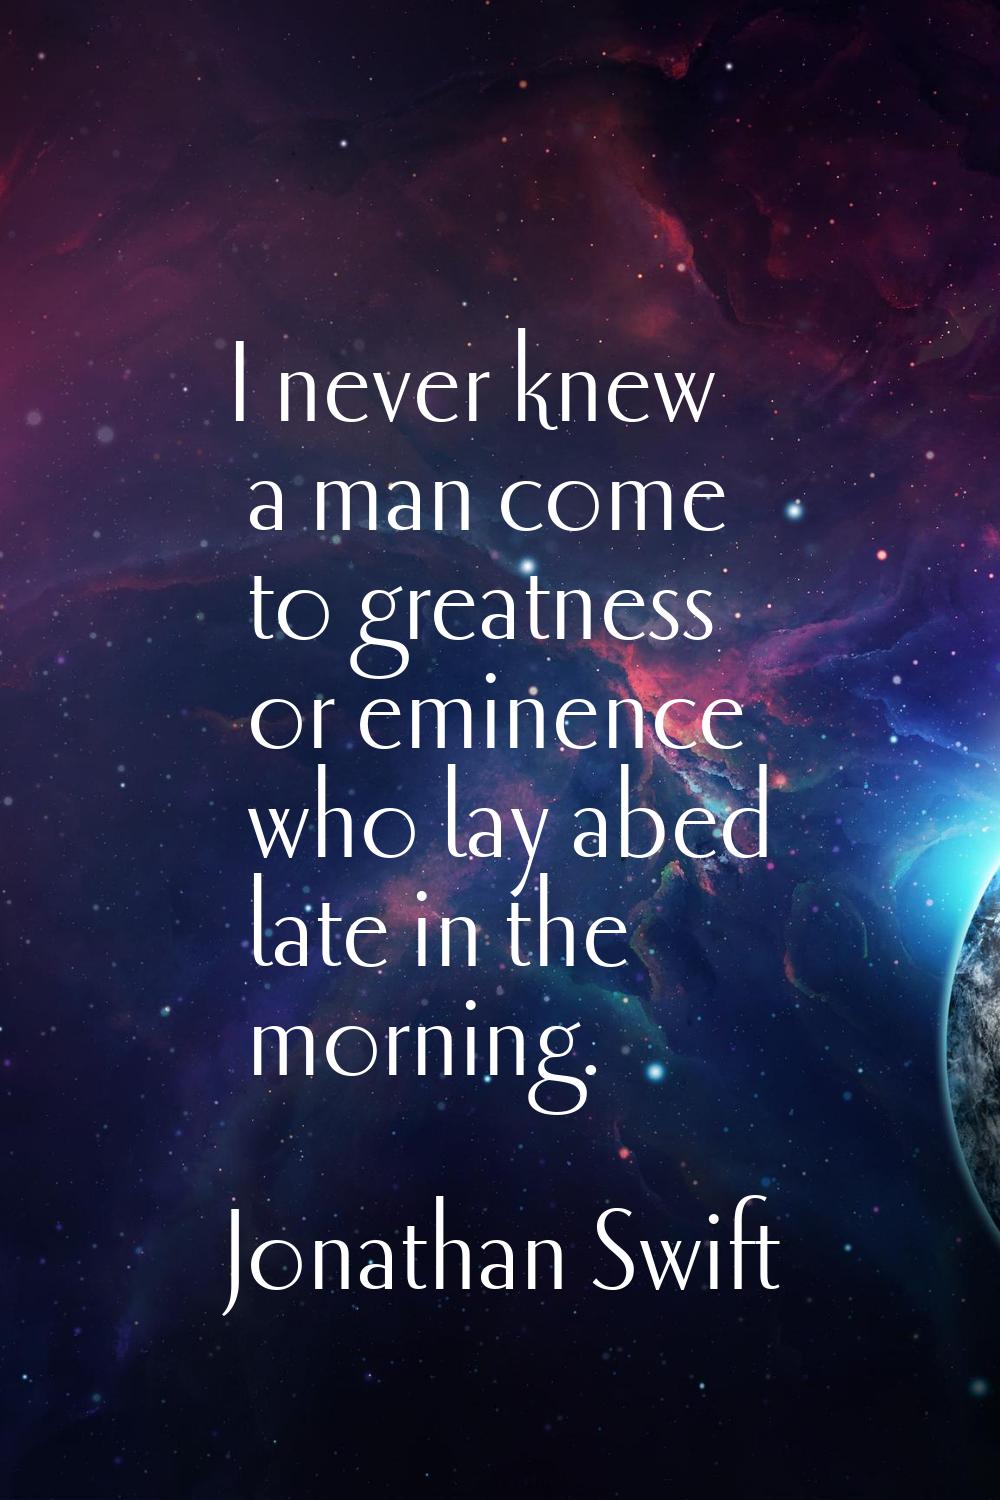 I never knew a man come to greatness or eminence who lay abed late in the morning.